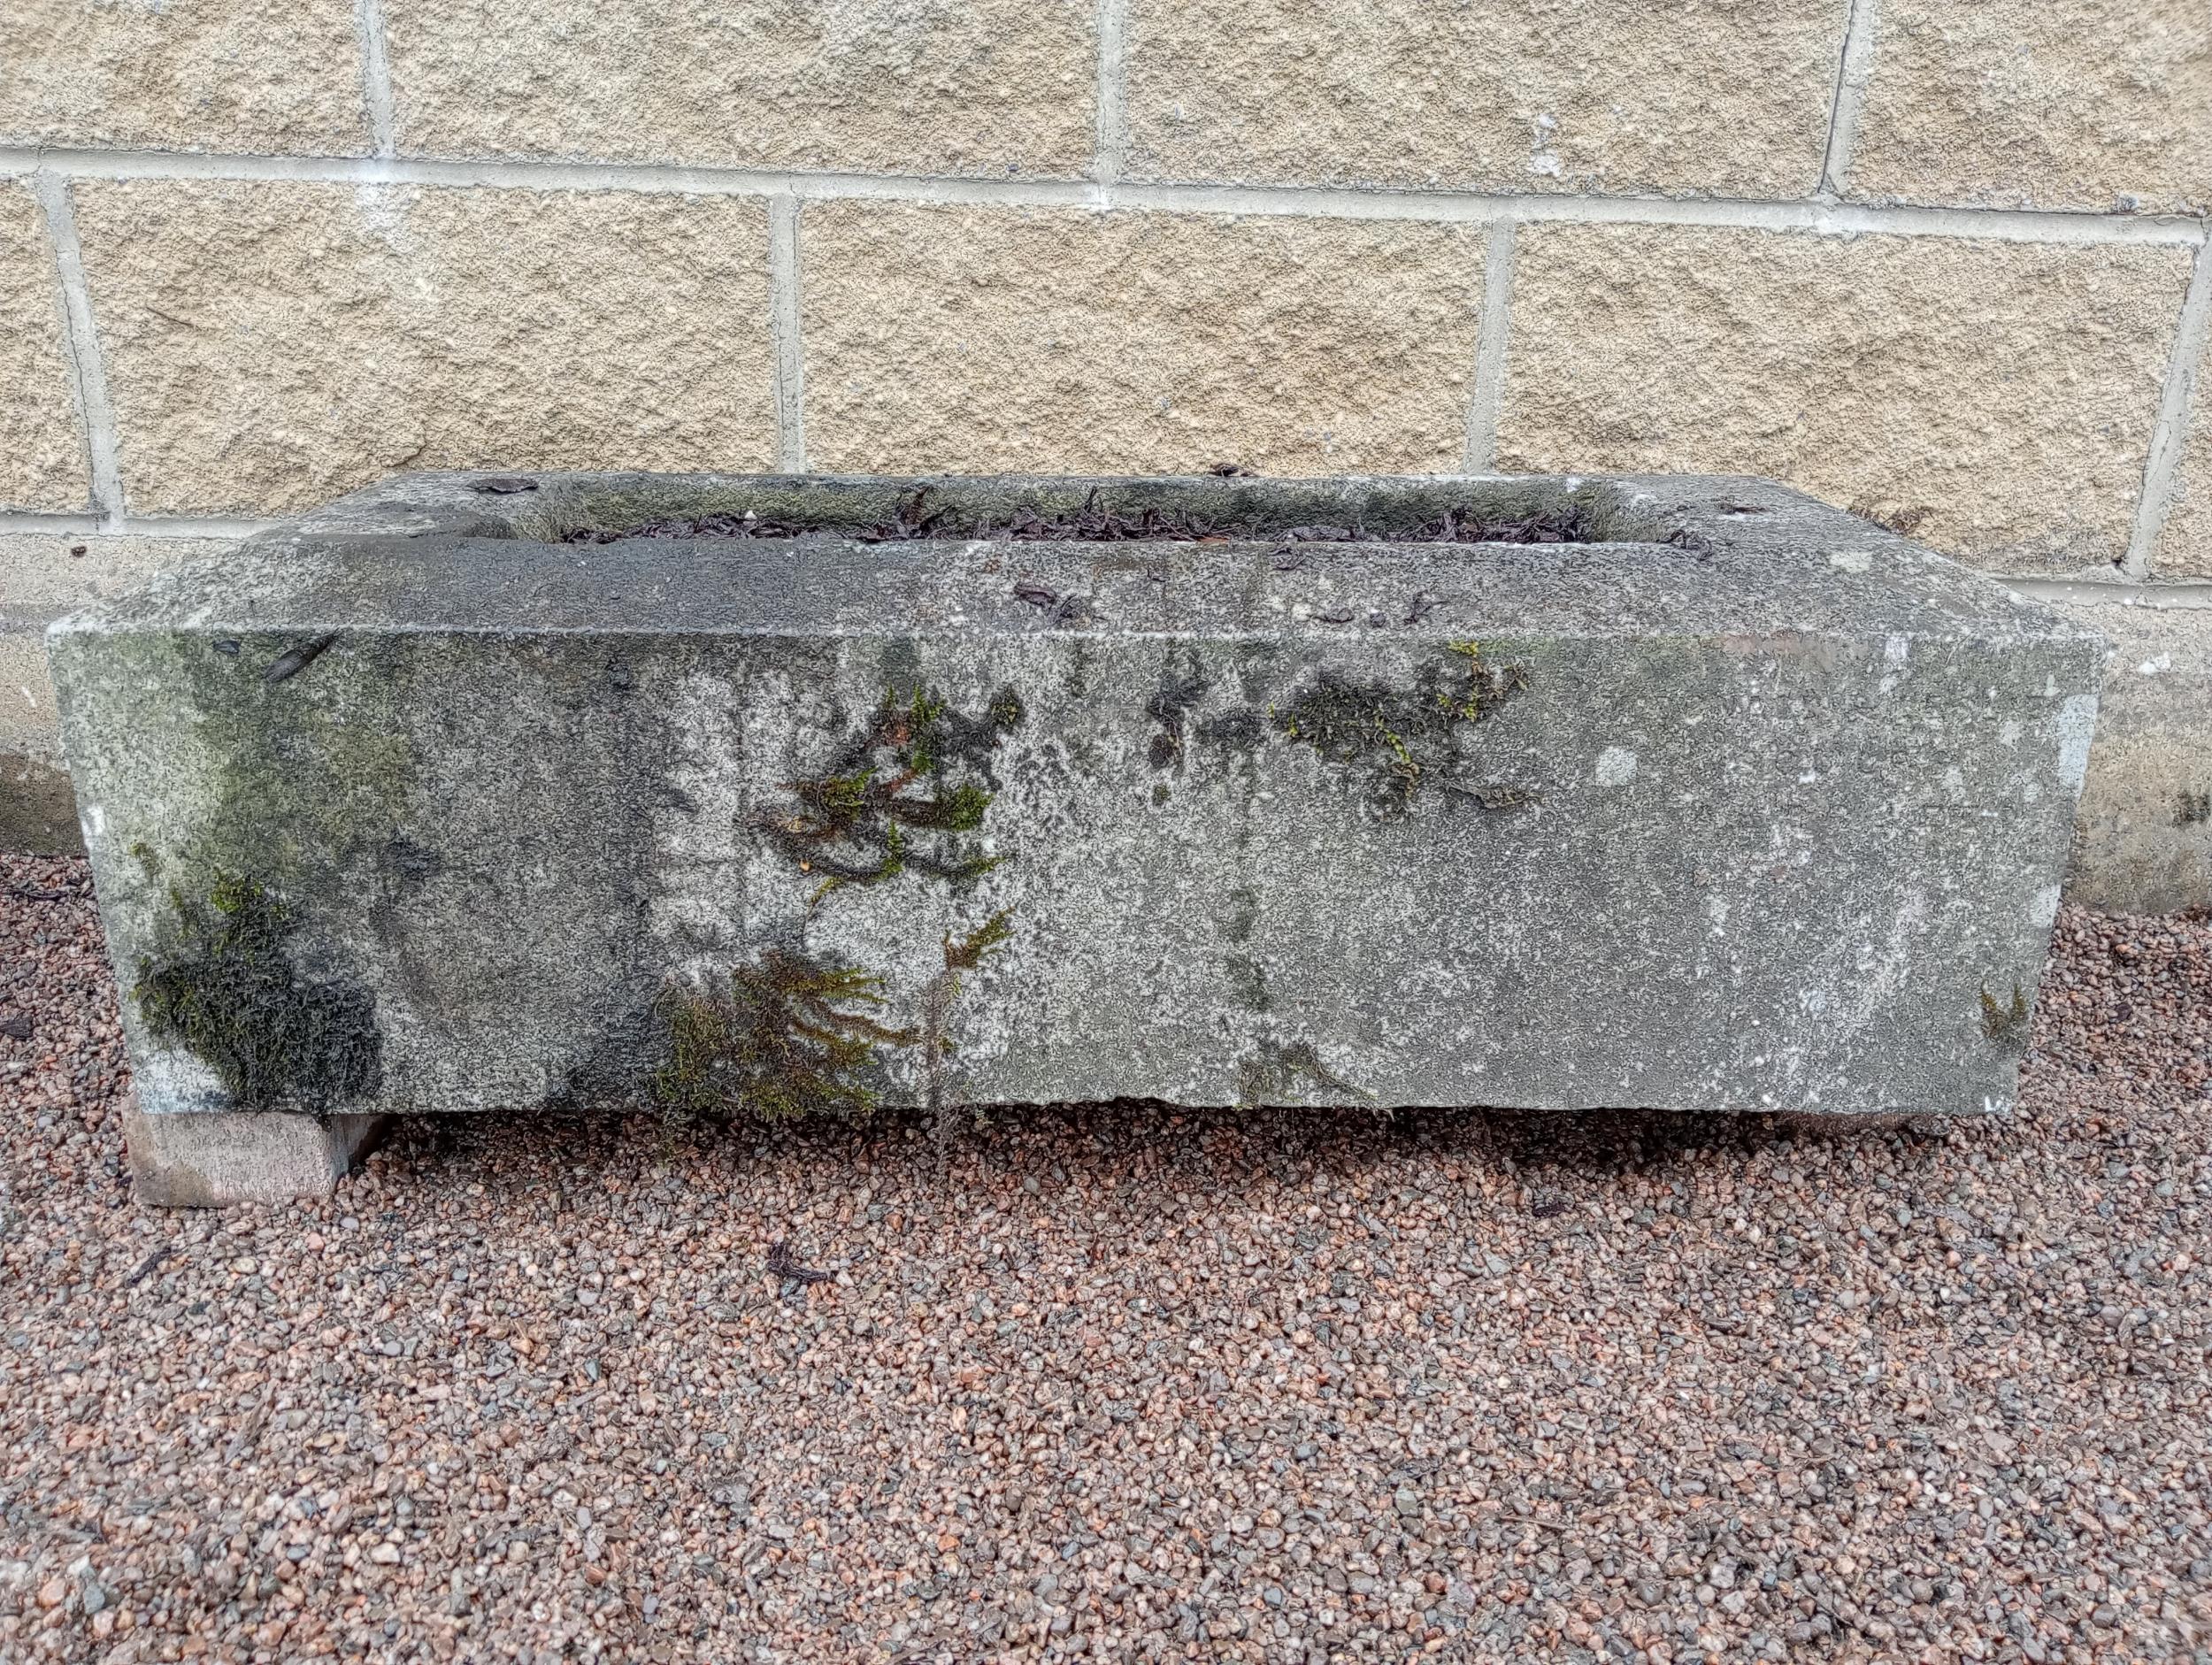 Stone trough planter {H 25cm x W 90cm x D 34cm }. (NOT AVAILABLE TO VIEW IN PERSON) - Image 2 of 3